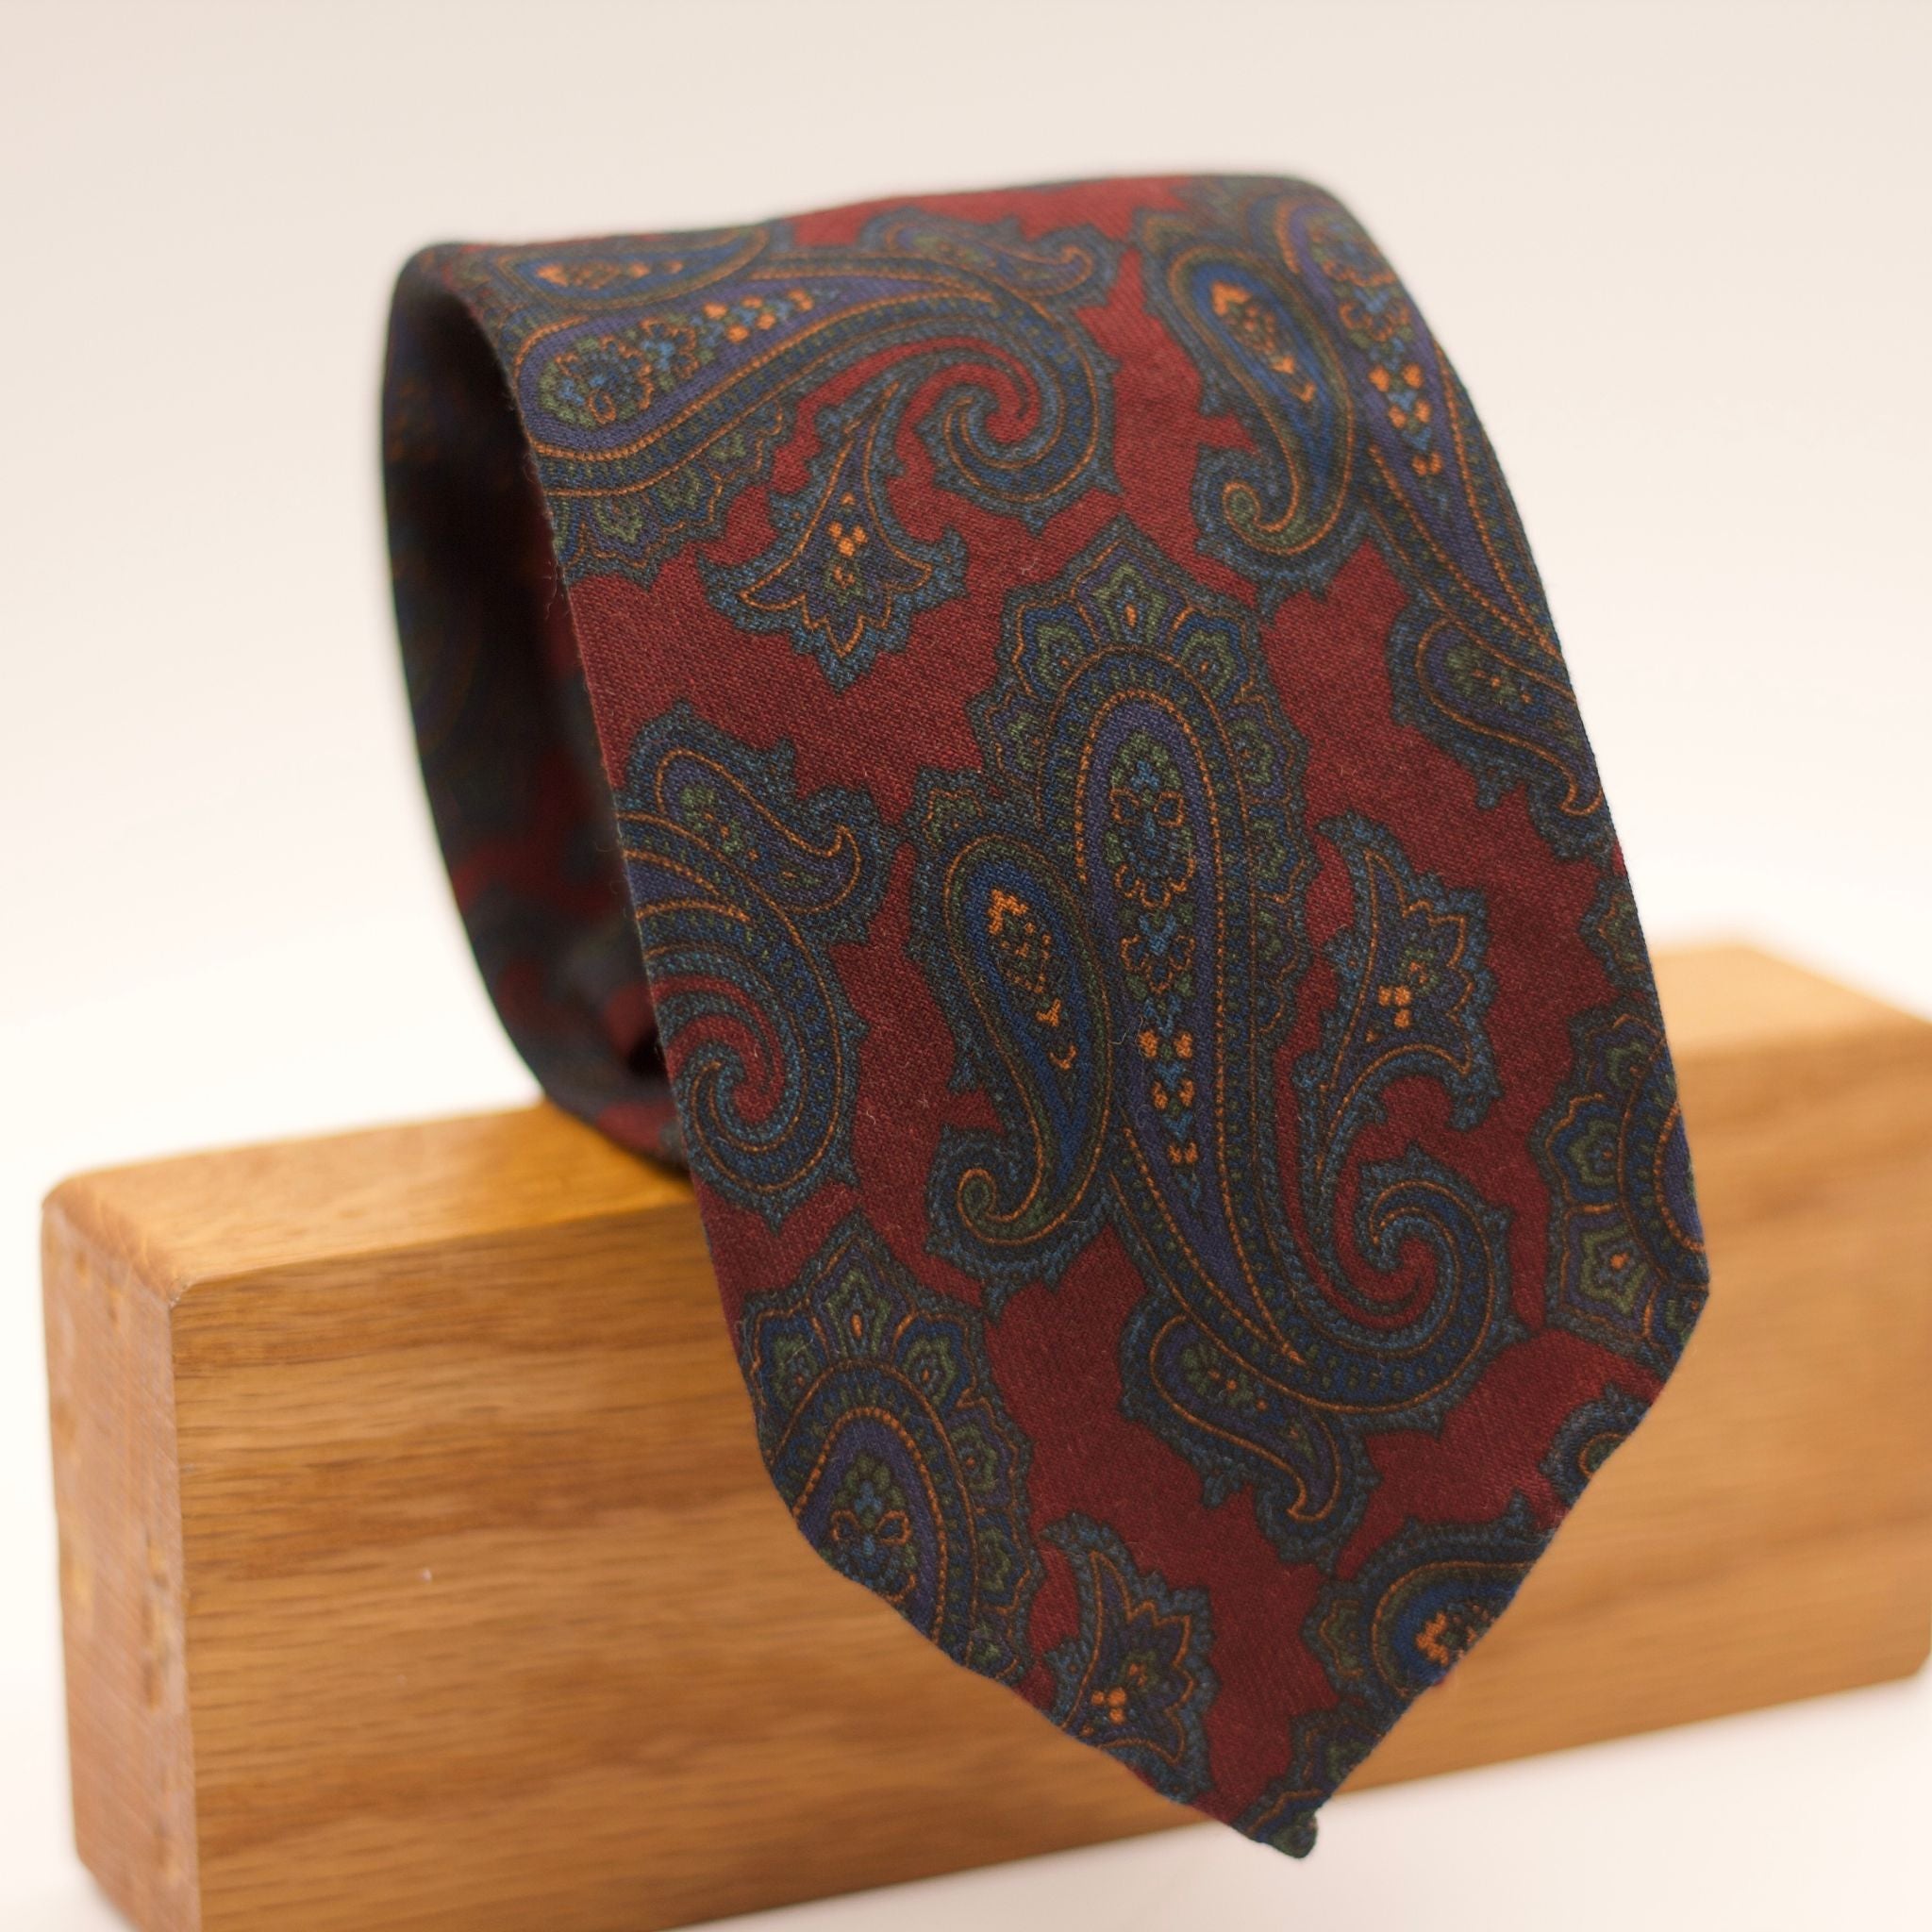 Cruciani & Bella 100%  Printed Wool  Unlined Hand rolled blades Dark Red, Green and Bue Paisley Motif Tie Handmade in Italy 8 cm x 150 cm #7453